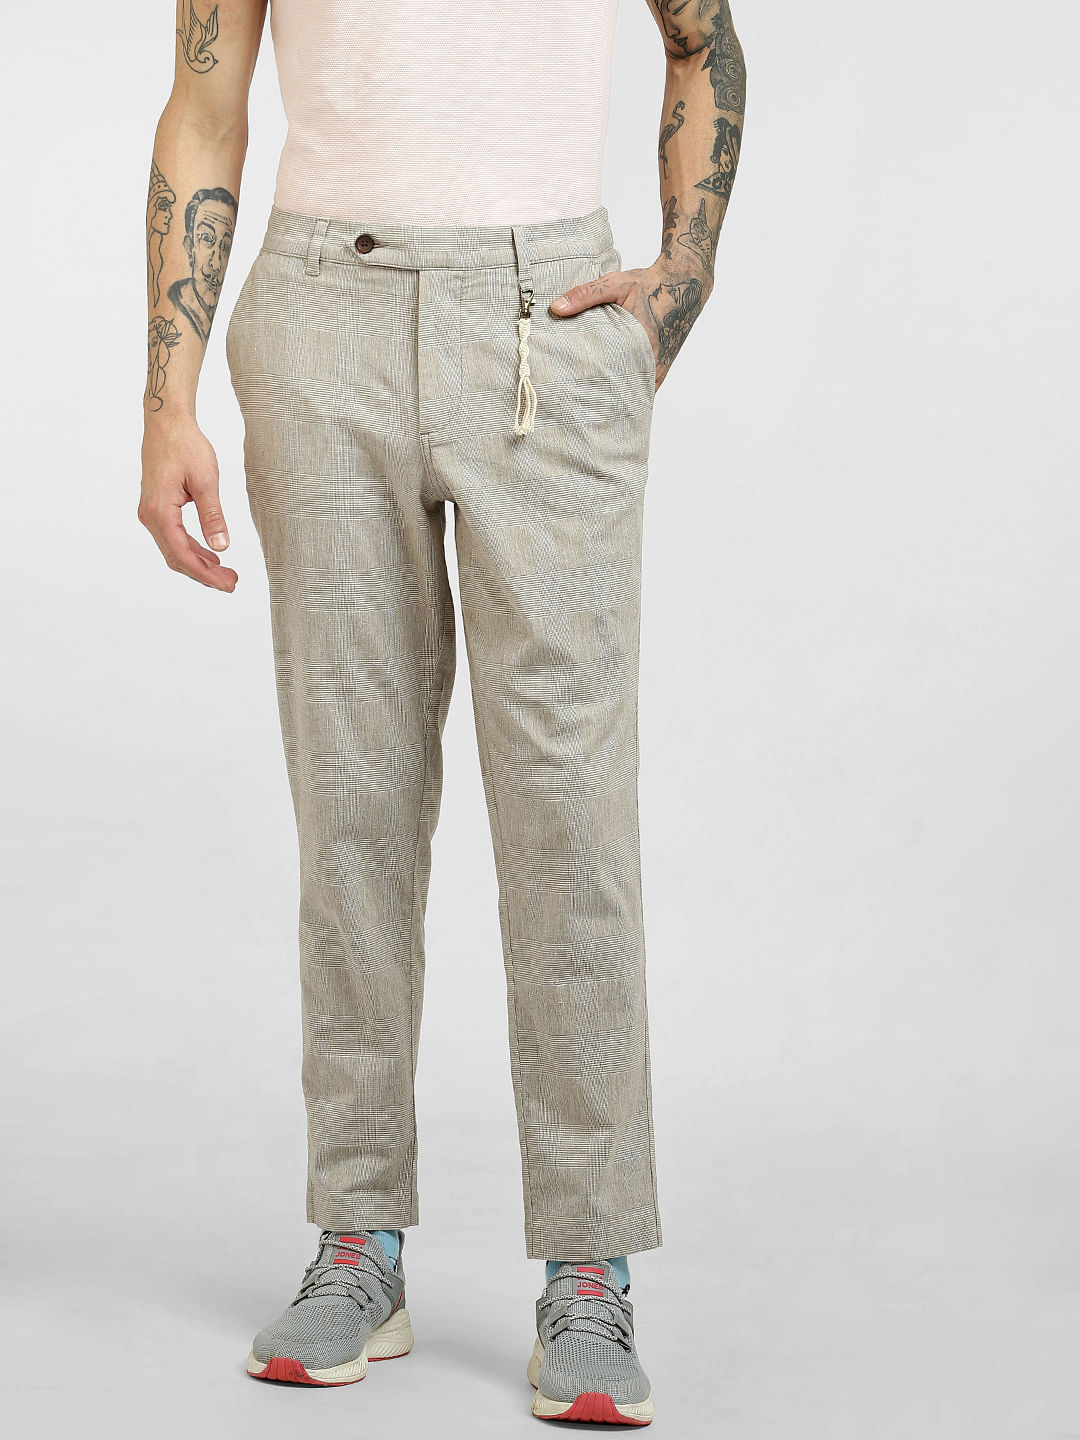 Jack & Jones Grey Linen-Look Trousers | New Look | Mens outfits, Mens  trousers, Gray linen